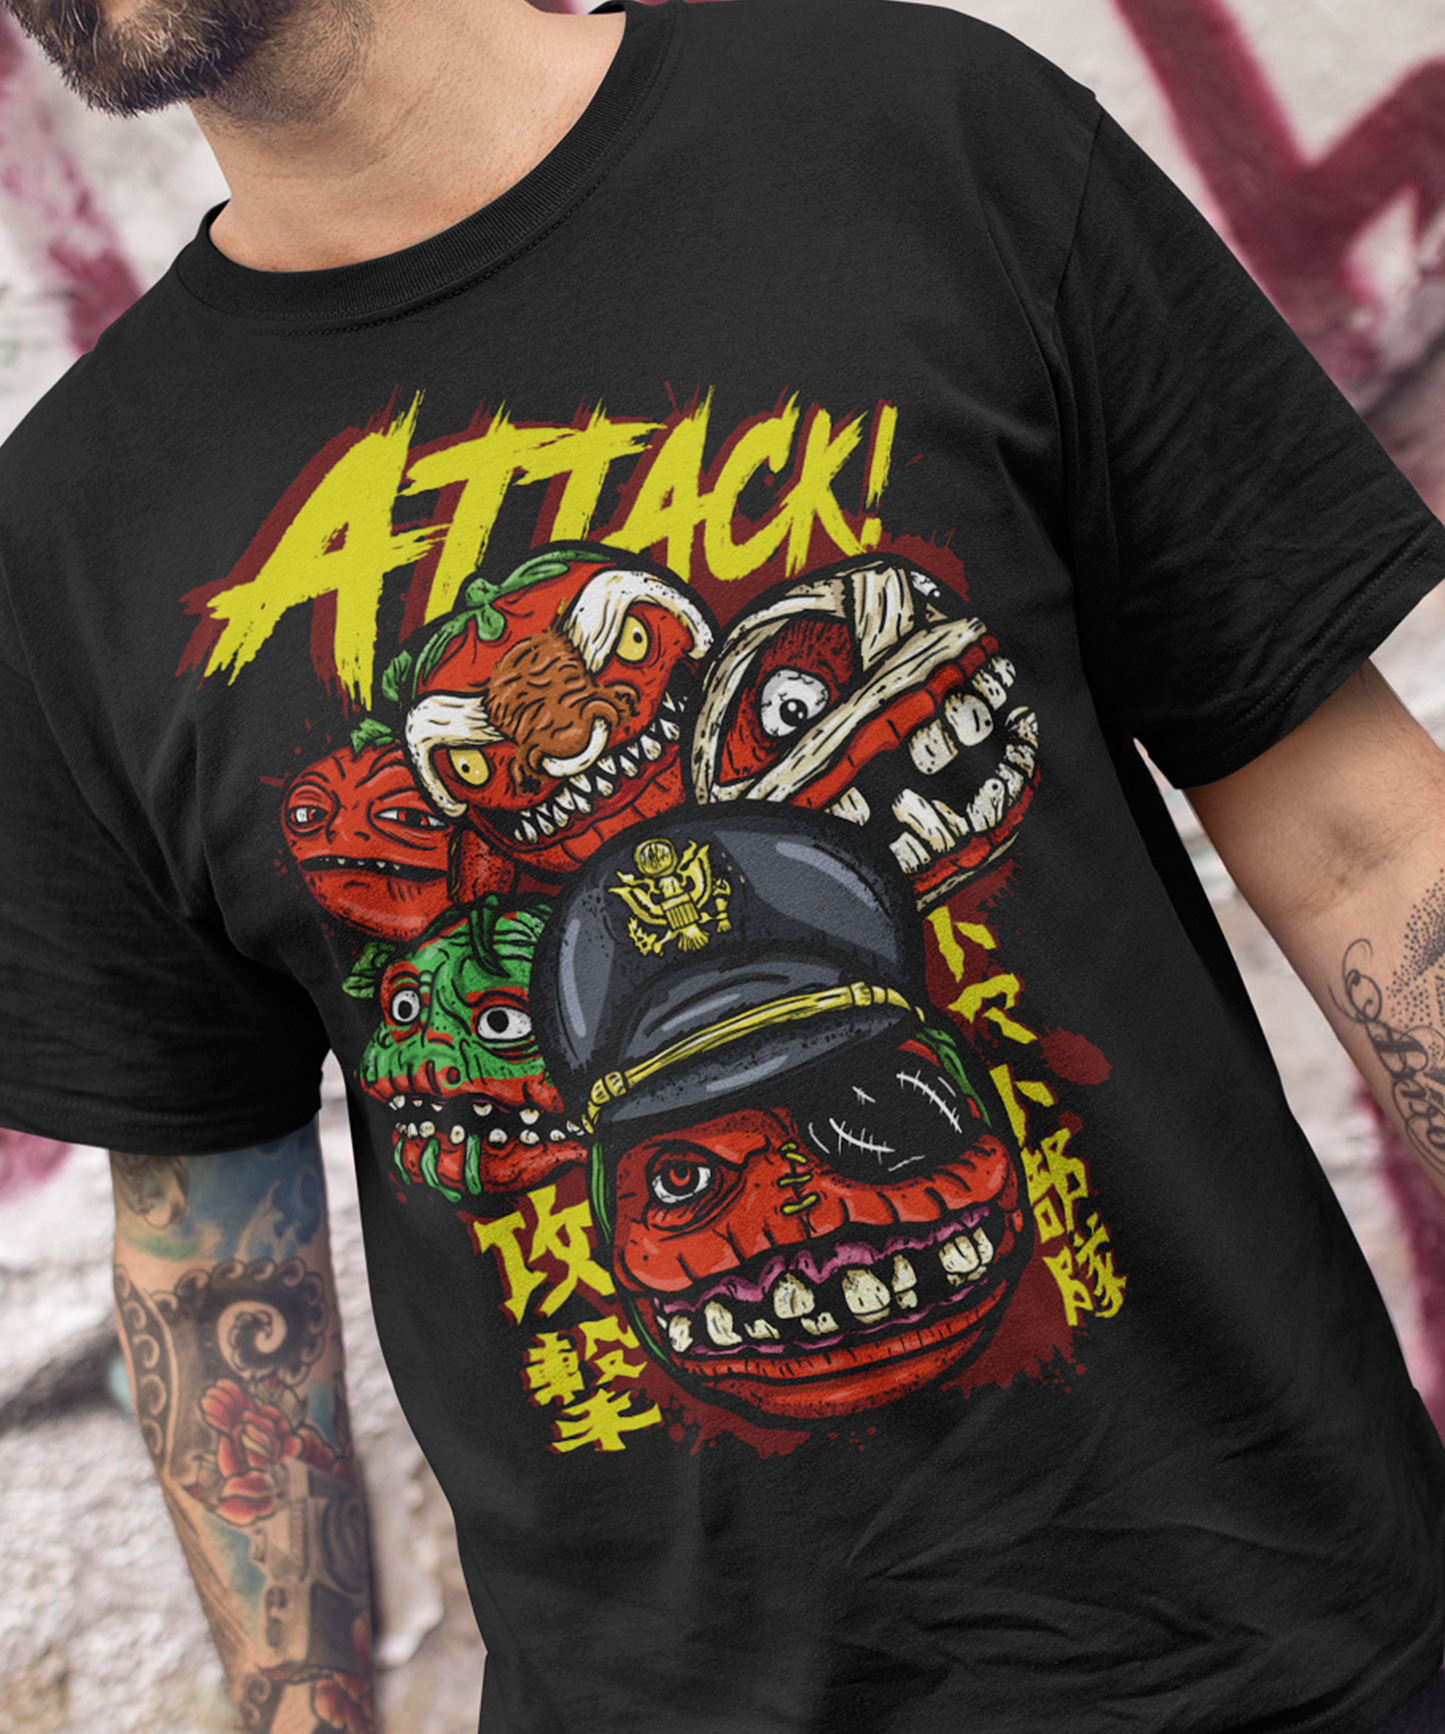 Tomato Troop, Attack of the Killer Tomatoes T-Shirt